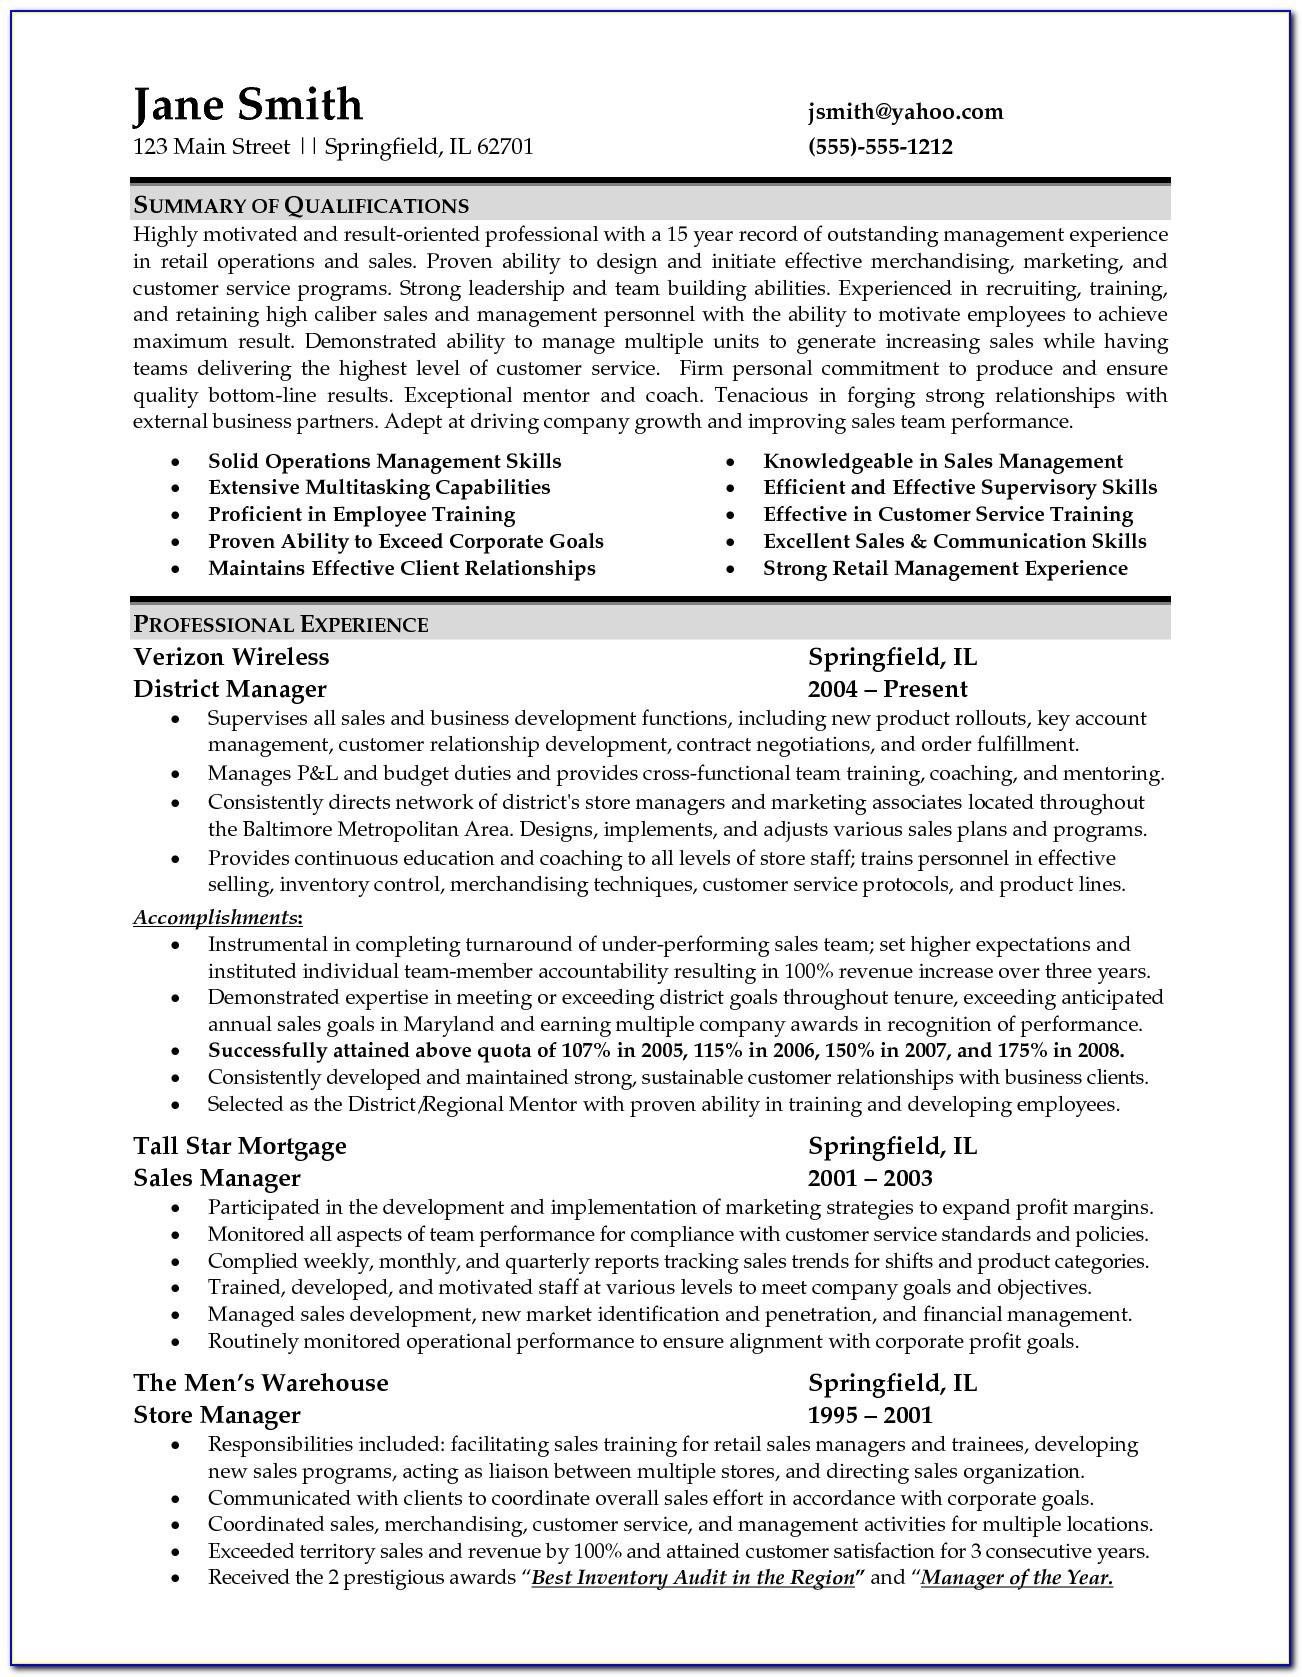 Resume Samples For Experienced Administrative Assistants